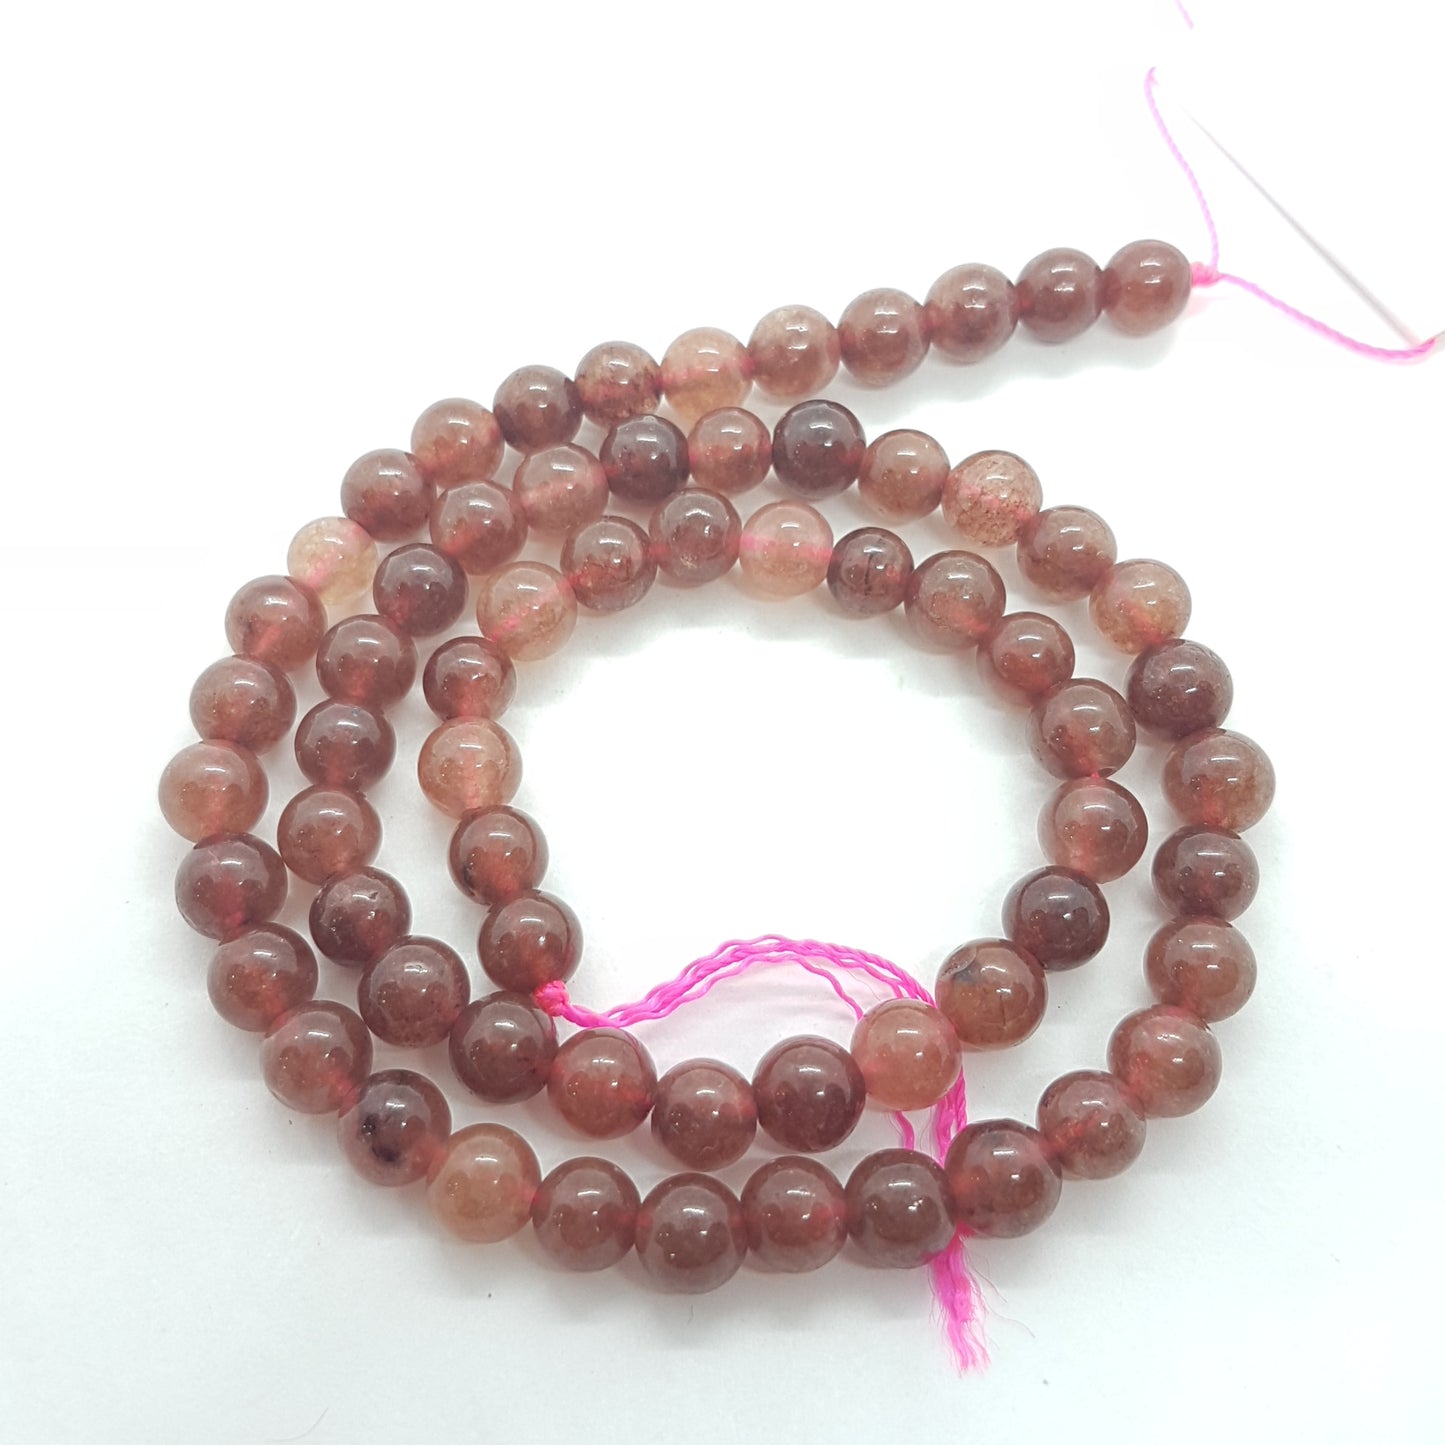 6mm Red Agate Gemstone Beads